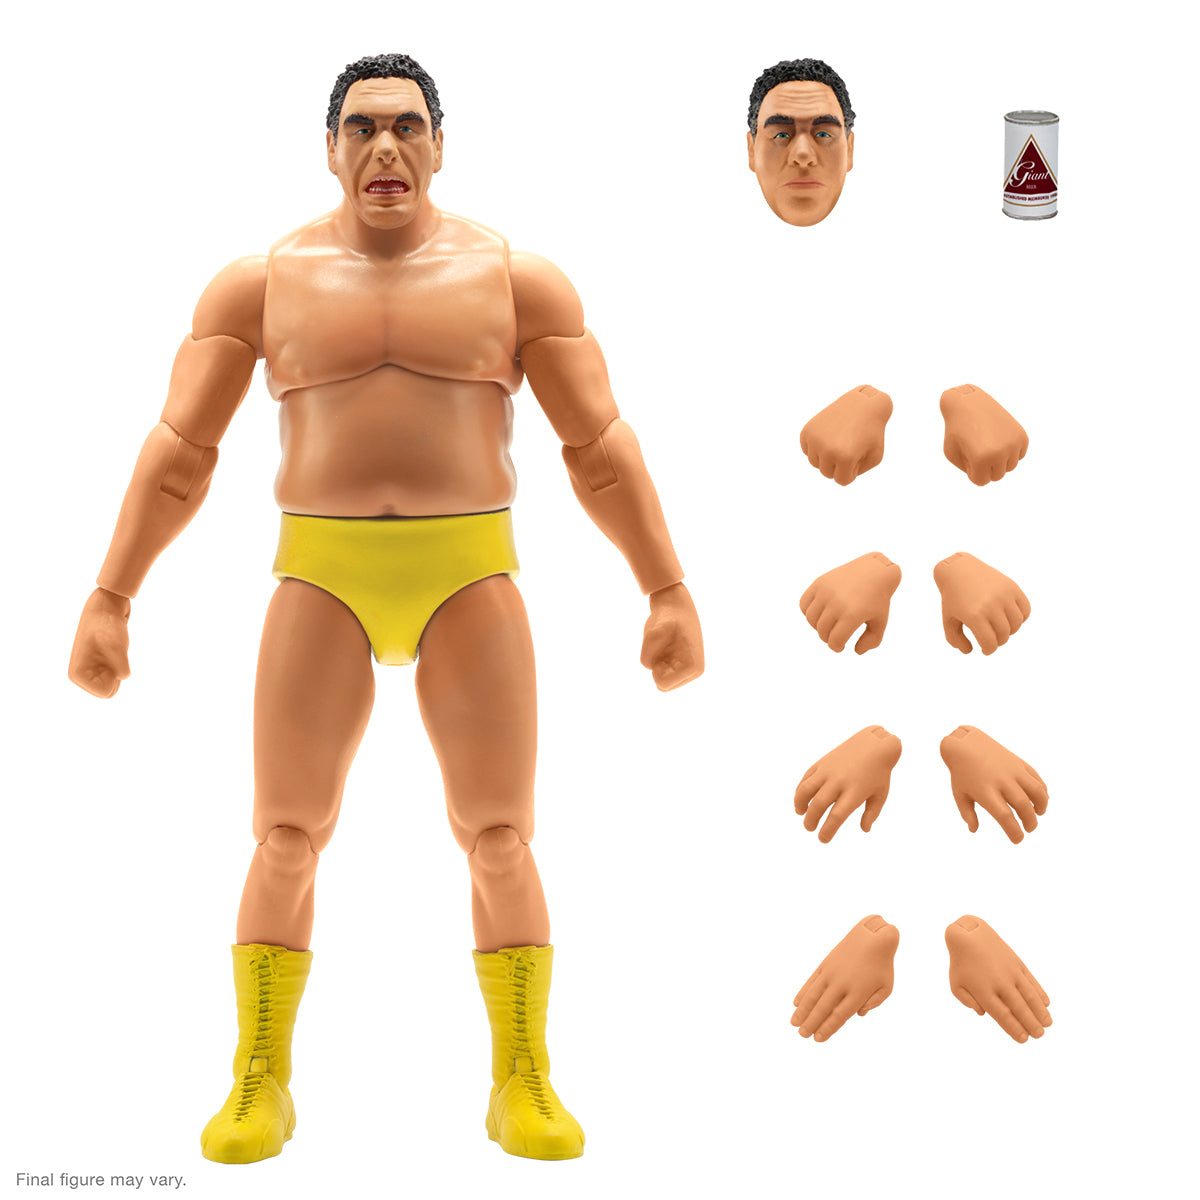 Super7 Ultimates Andre the Giant [1986 Edition]